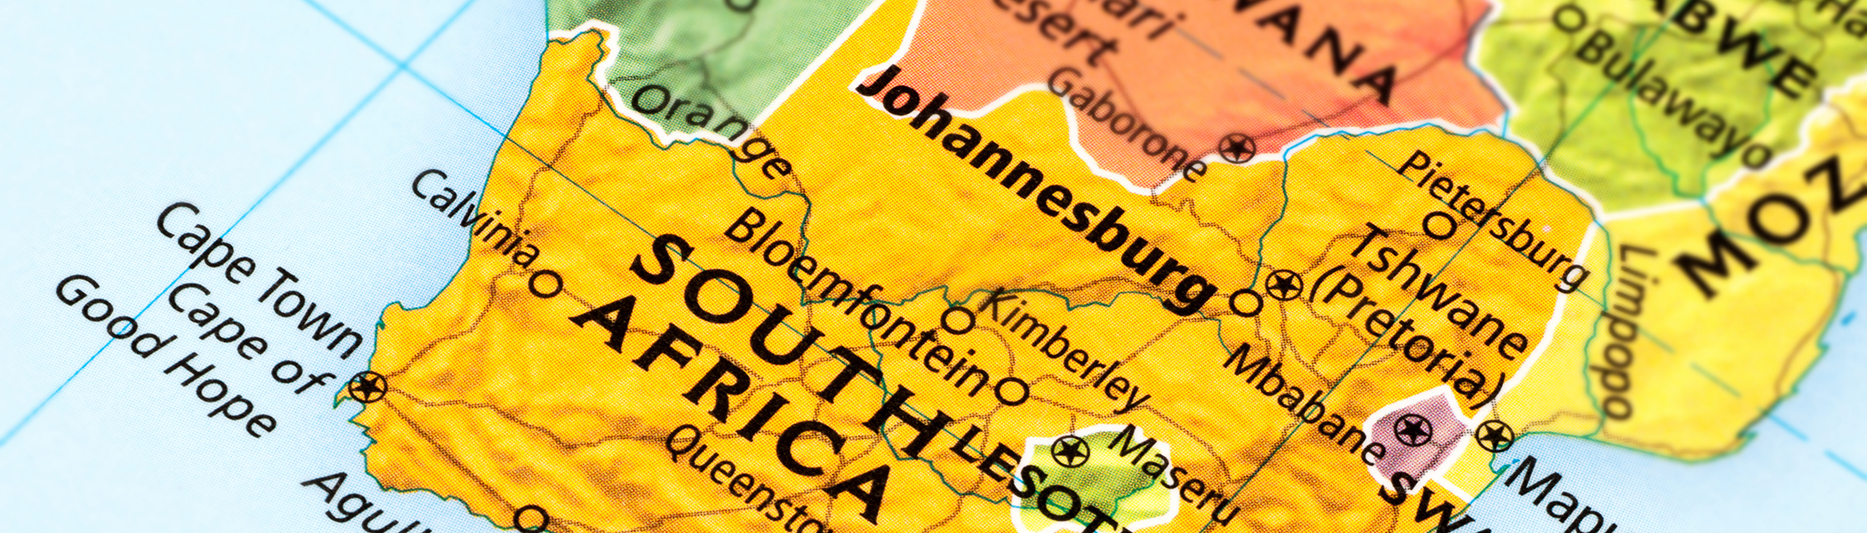 South Africa immigration 2021 outlook FAQ series (Part 4 of 4)